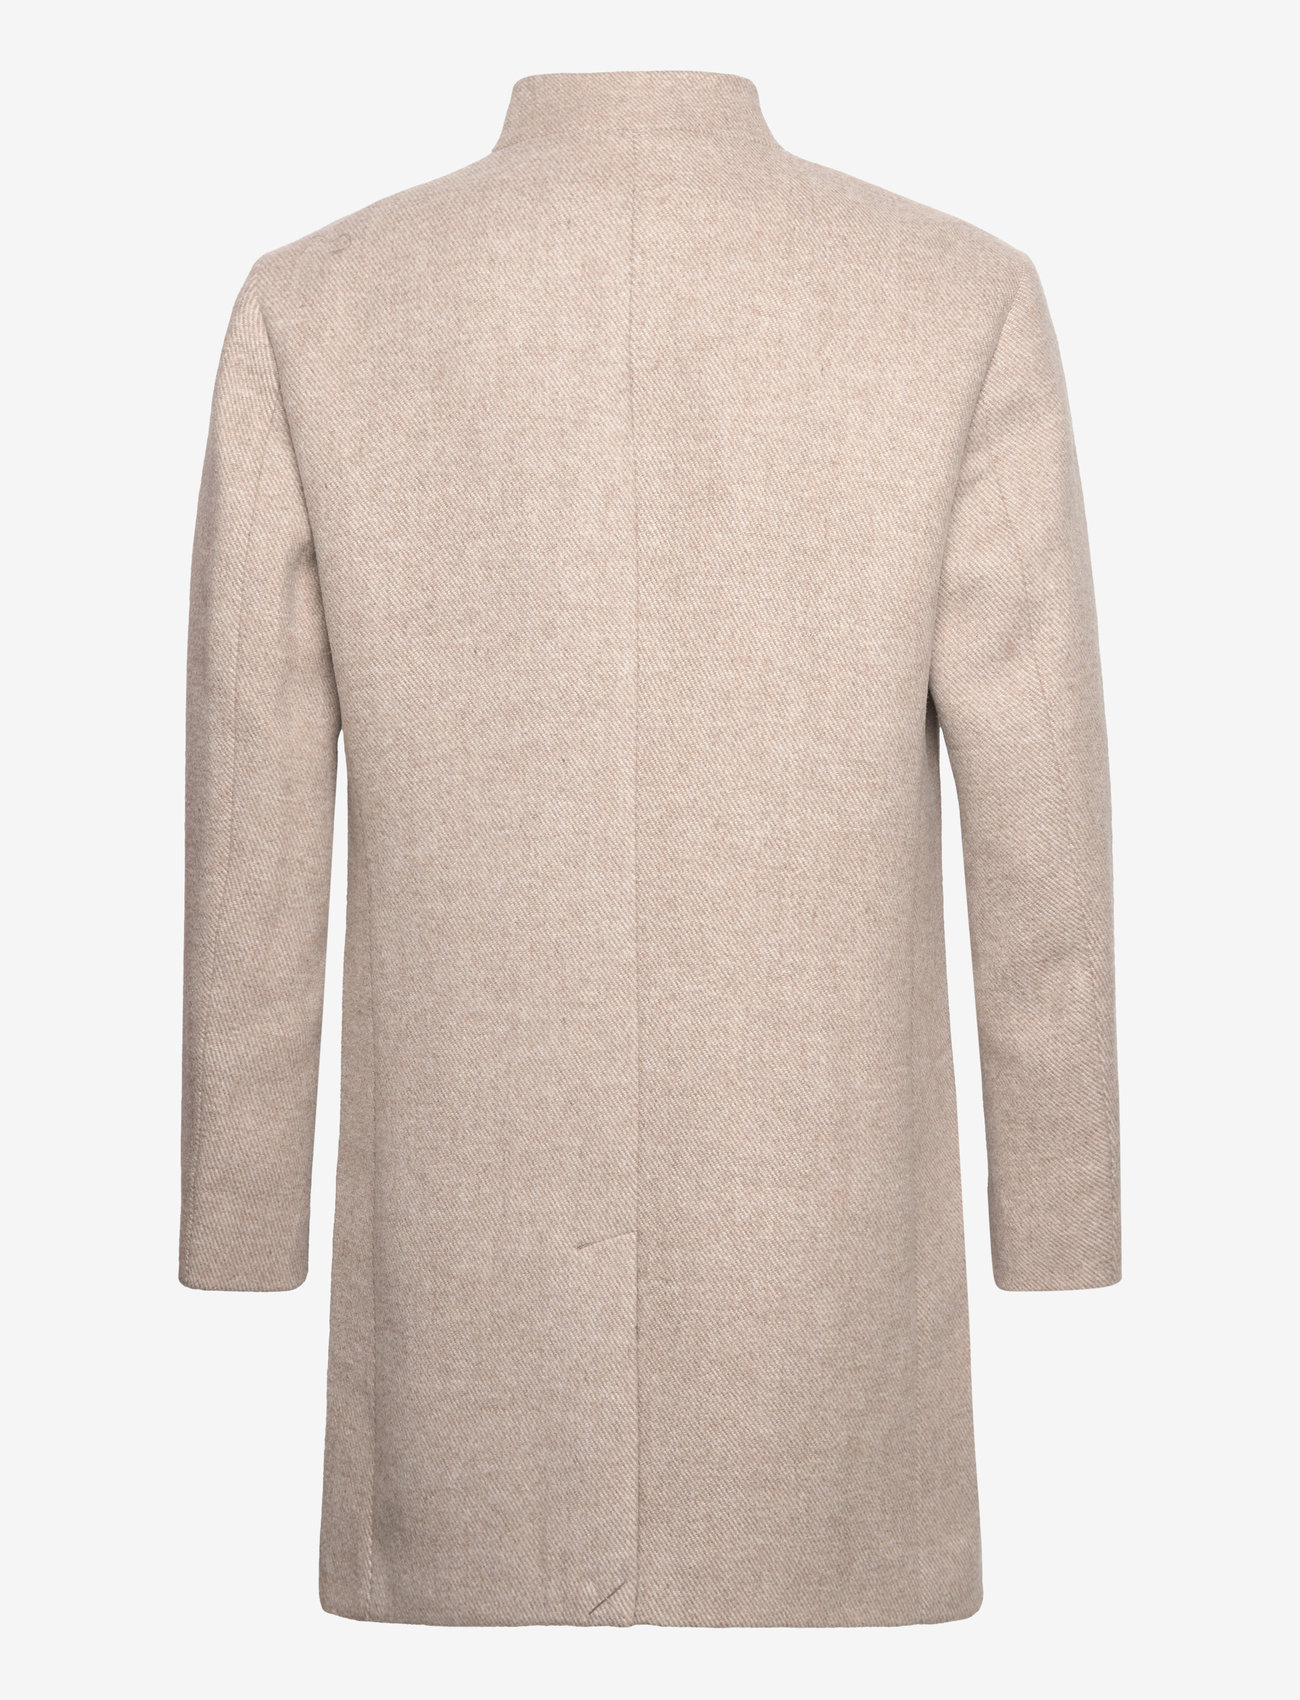 Tom Tailor - three button wool coat - winter jackets - sand off white twill structure - 1